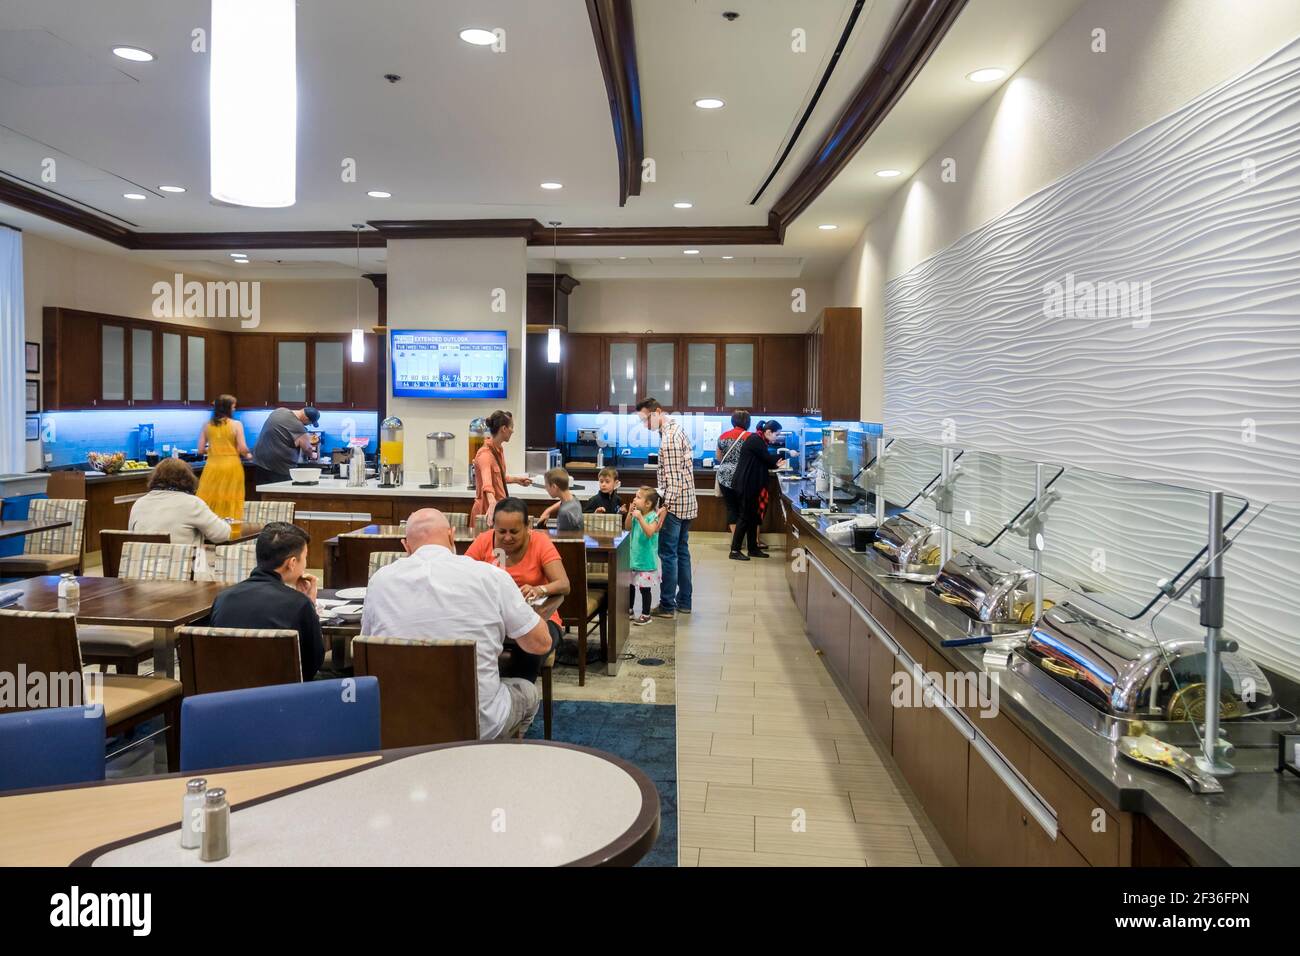 Washington DC,Homewood Suites by Hilton,hotel dining room free included breakfast buffet inside interior,guests eating, Stock Photo